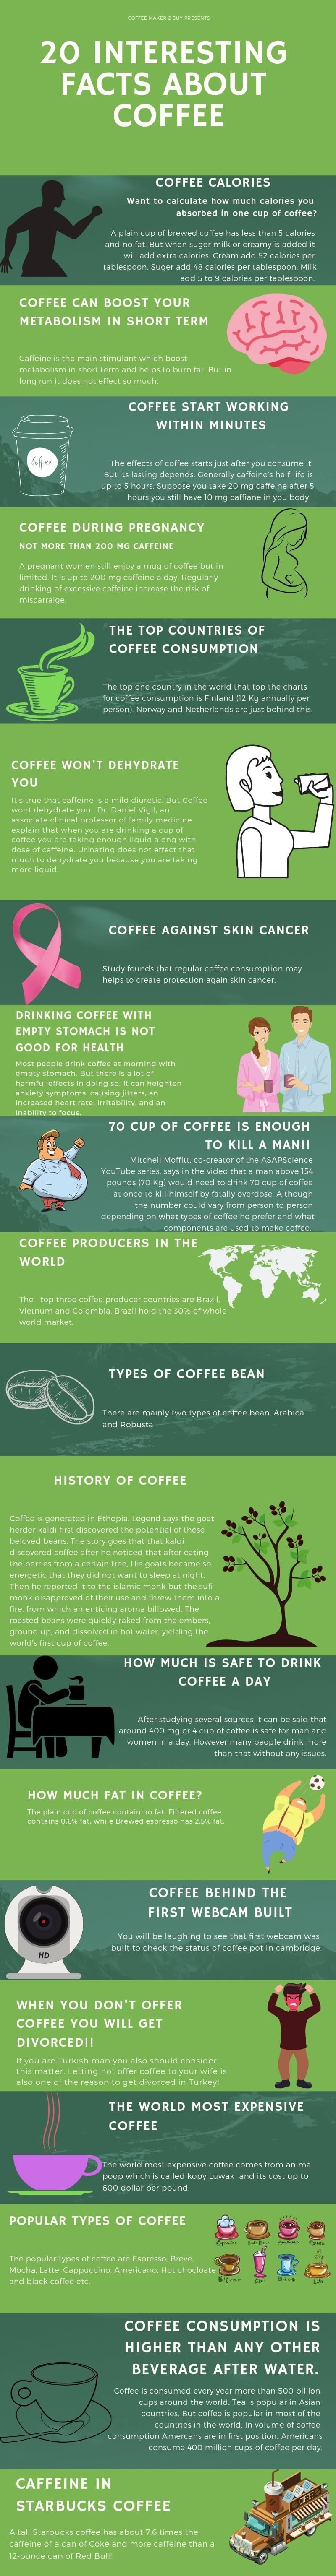 20-interesting-facts-about-coffee-infographic-plaza